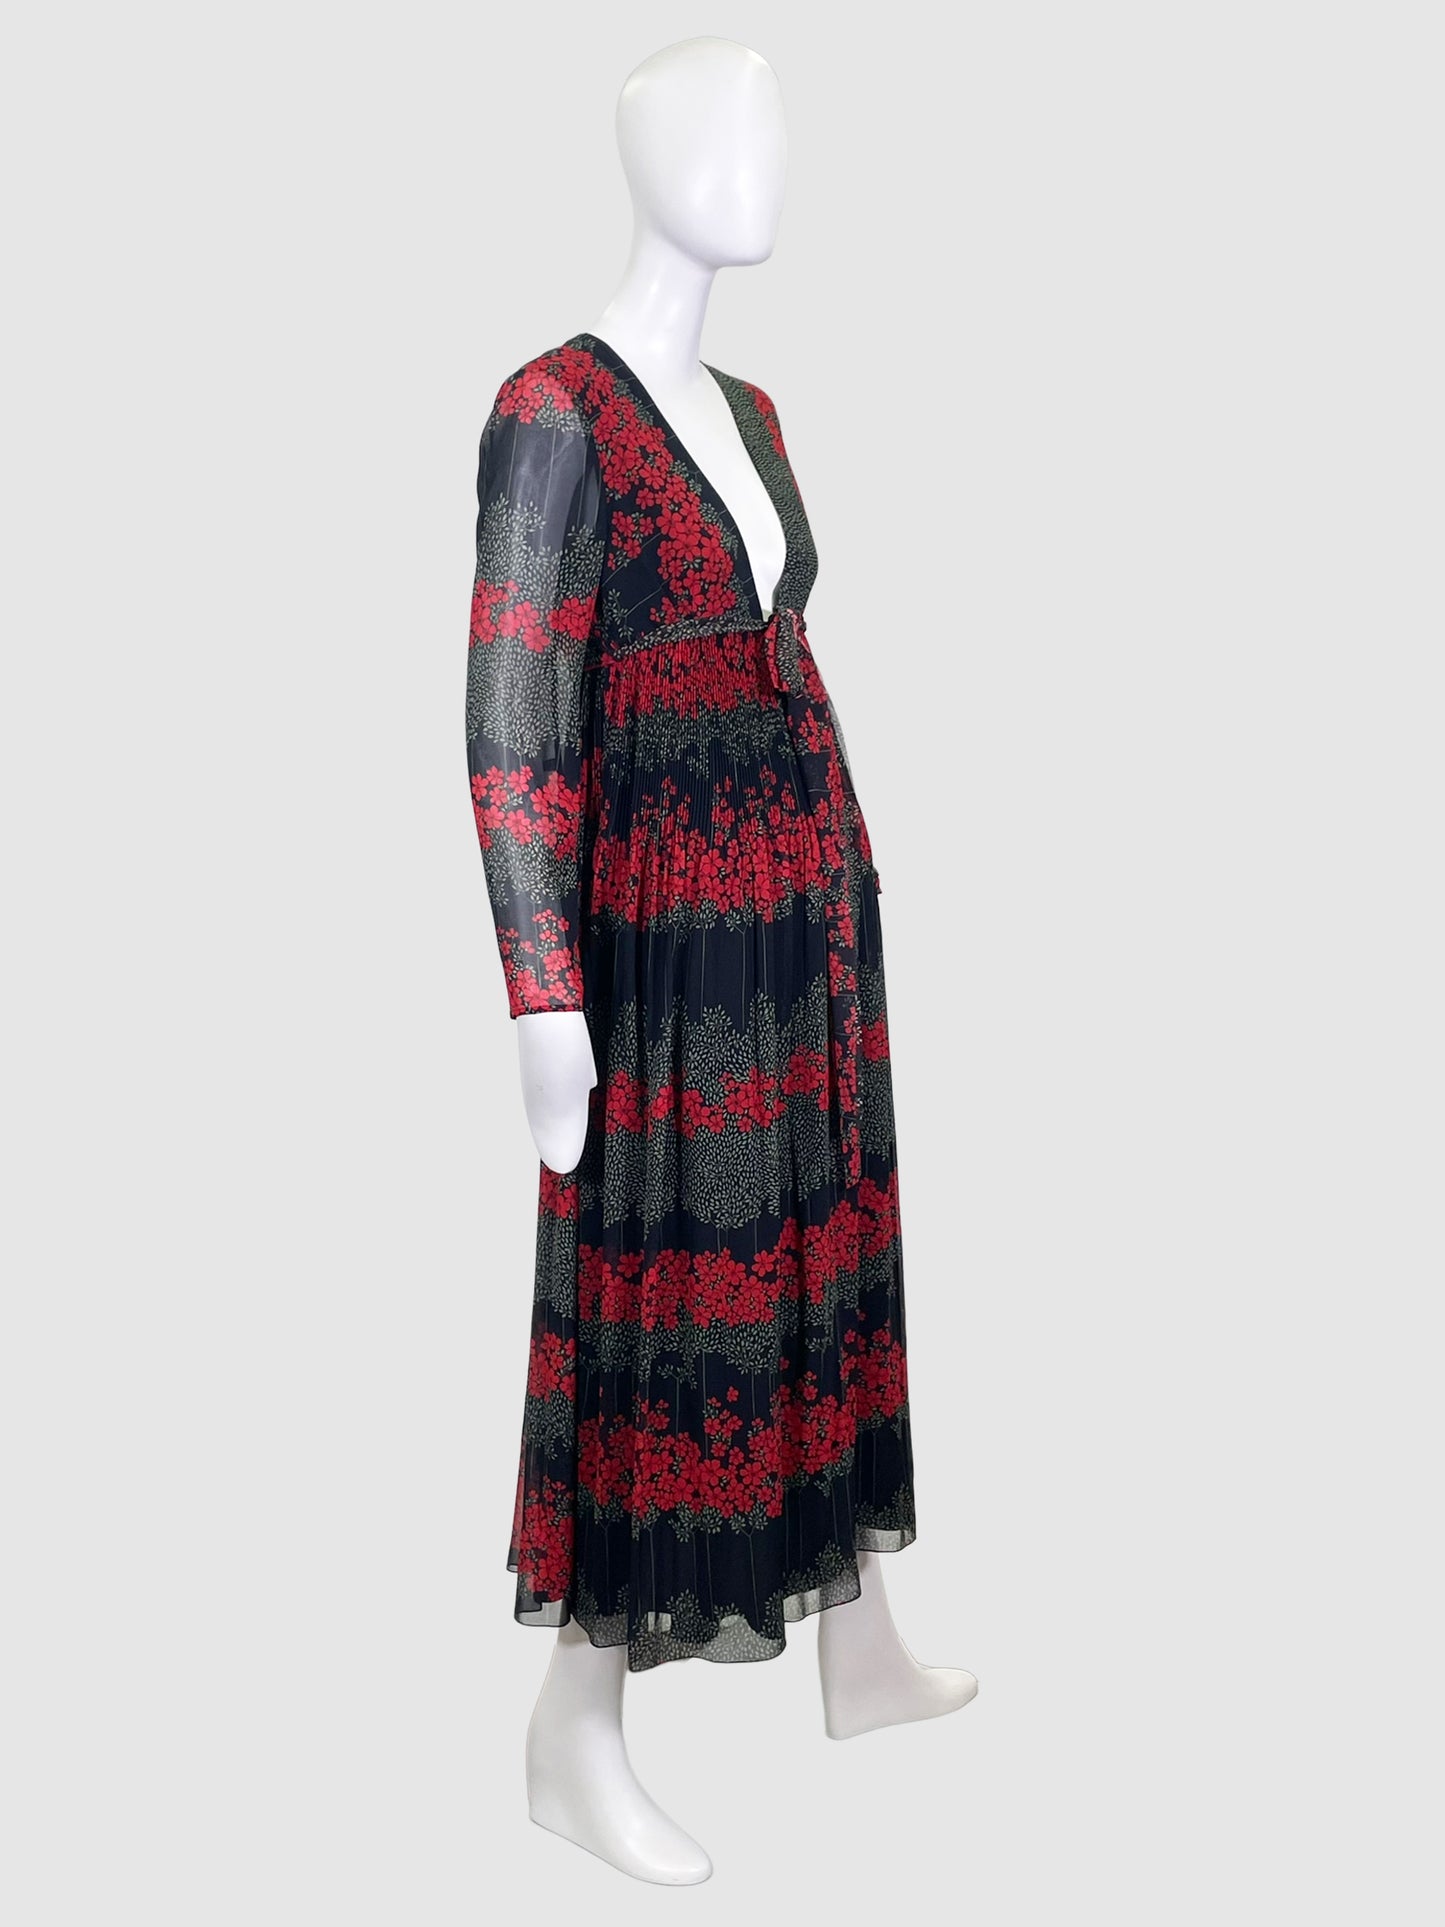 RED Valentino Floral Print Maxi Dress - Size 42